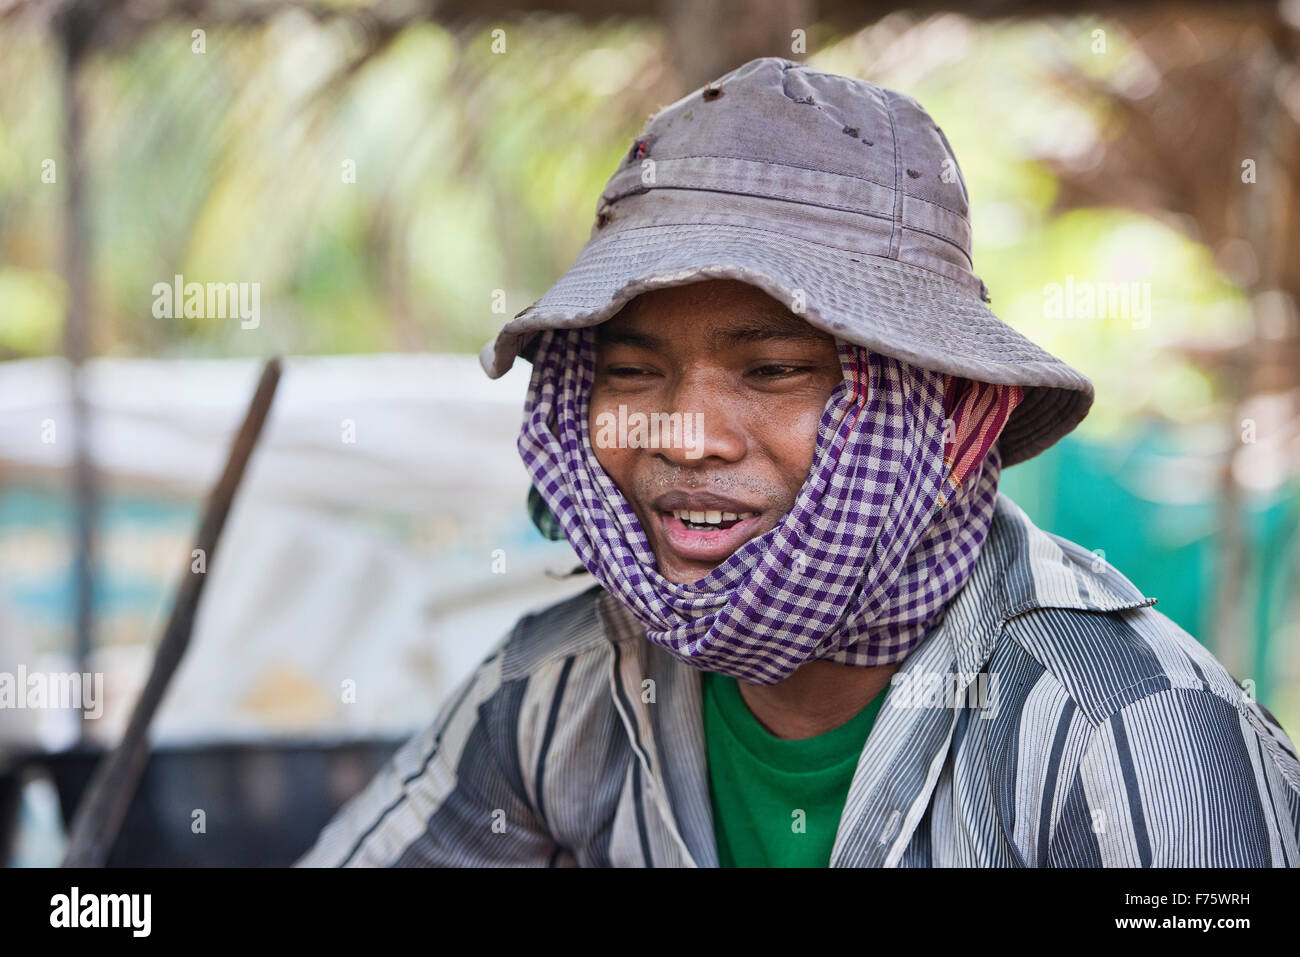 Young Khmer with a krama scarf, Siem Reap, Cambodia Stock Photo - Alamy